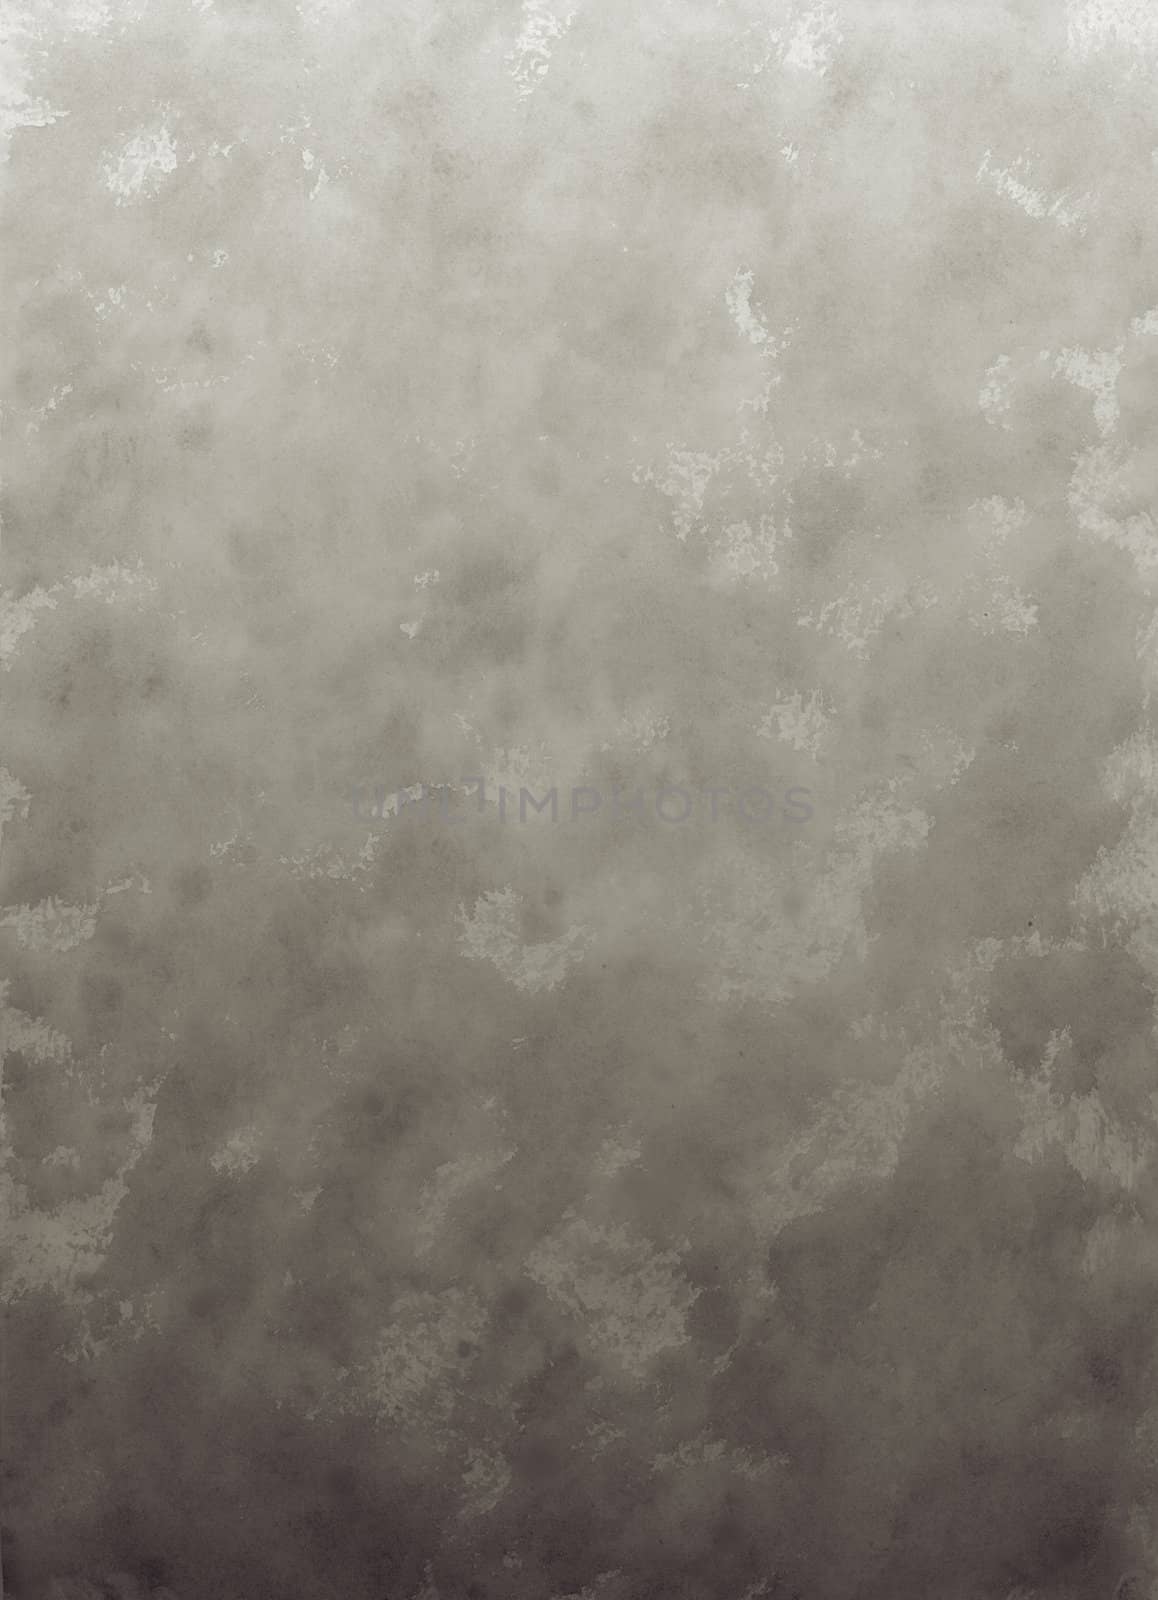 Abstract paper surface background image